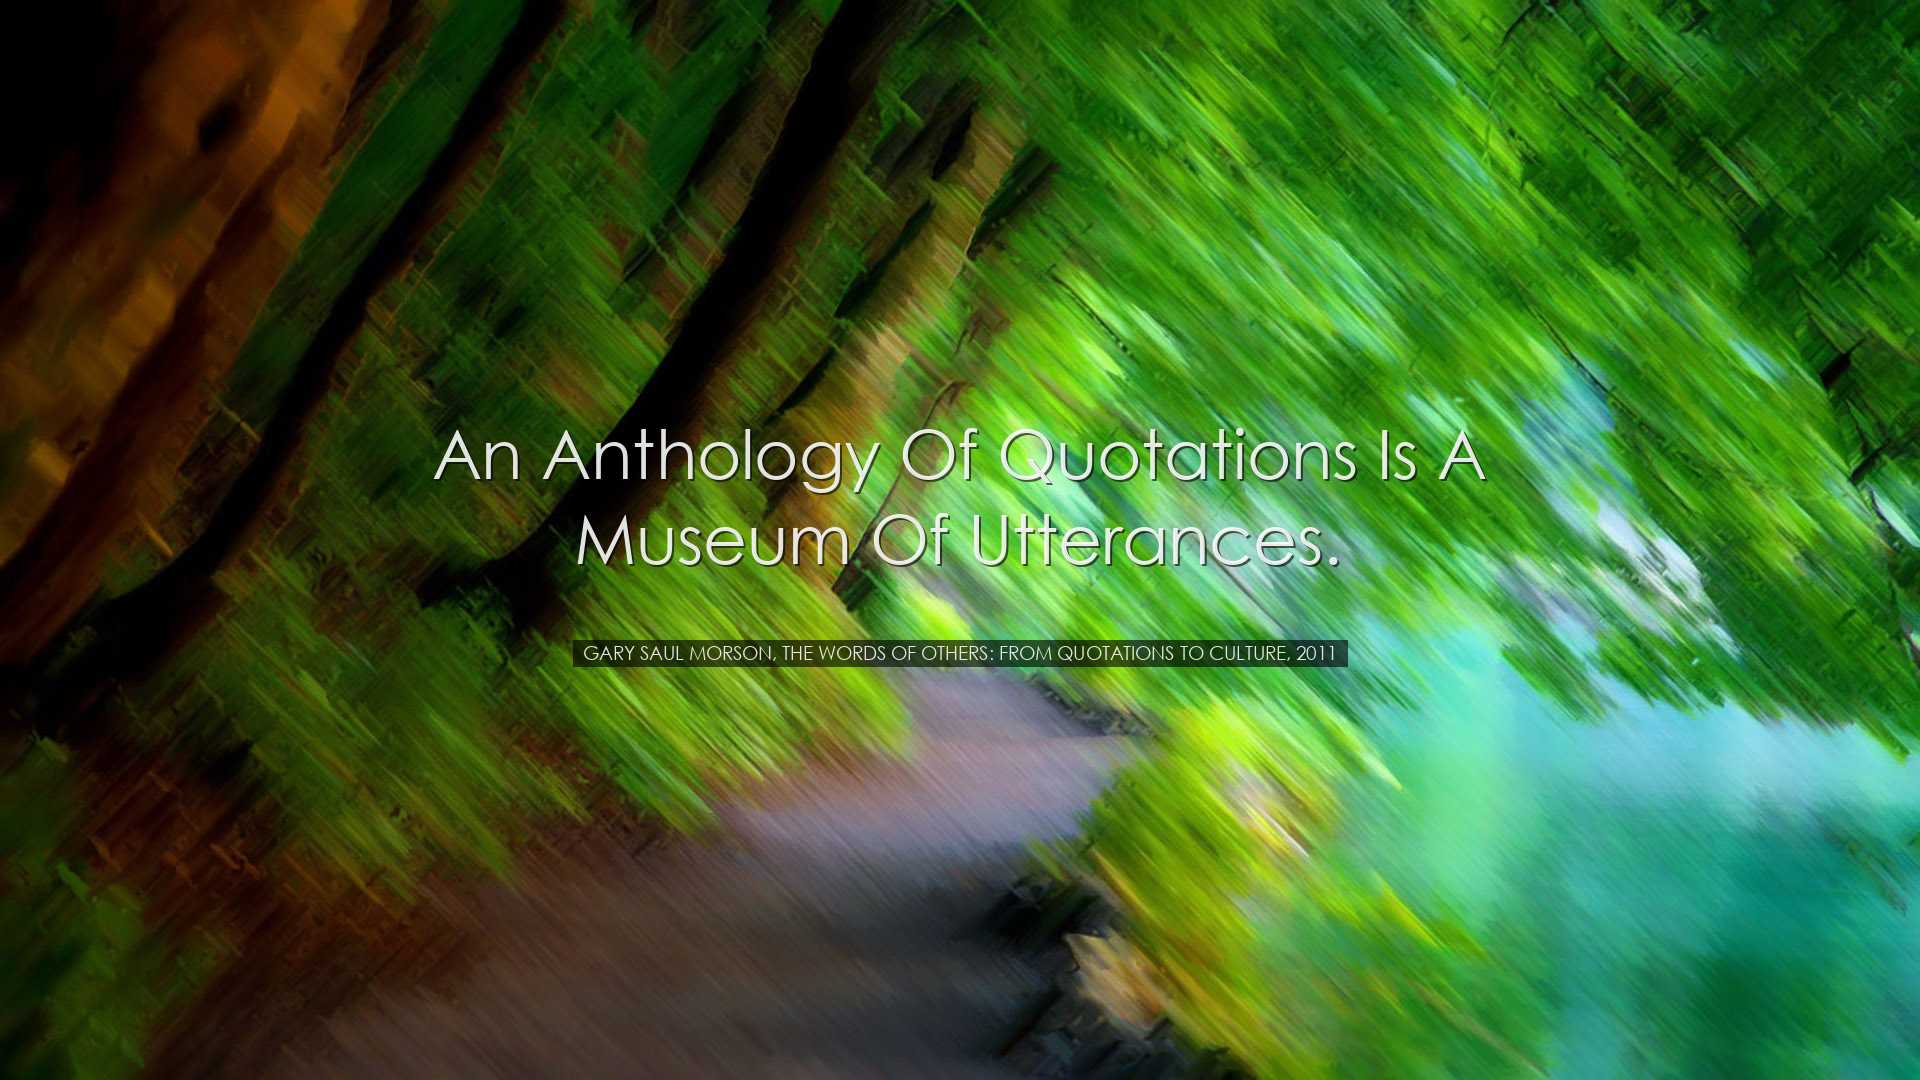 An anthology of quotations is a museum of utterances. - Gary Saul